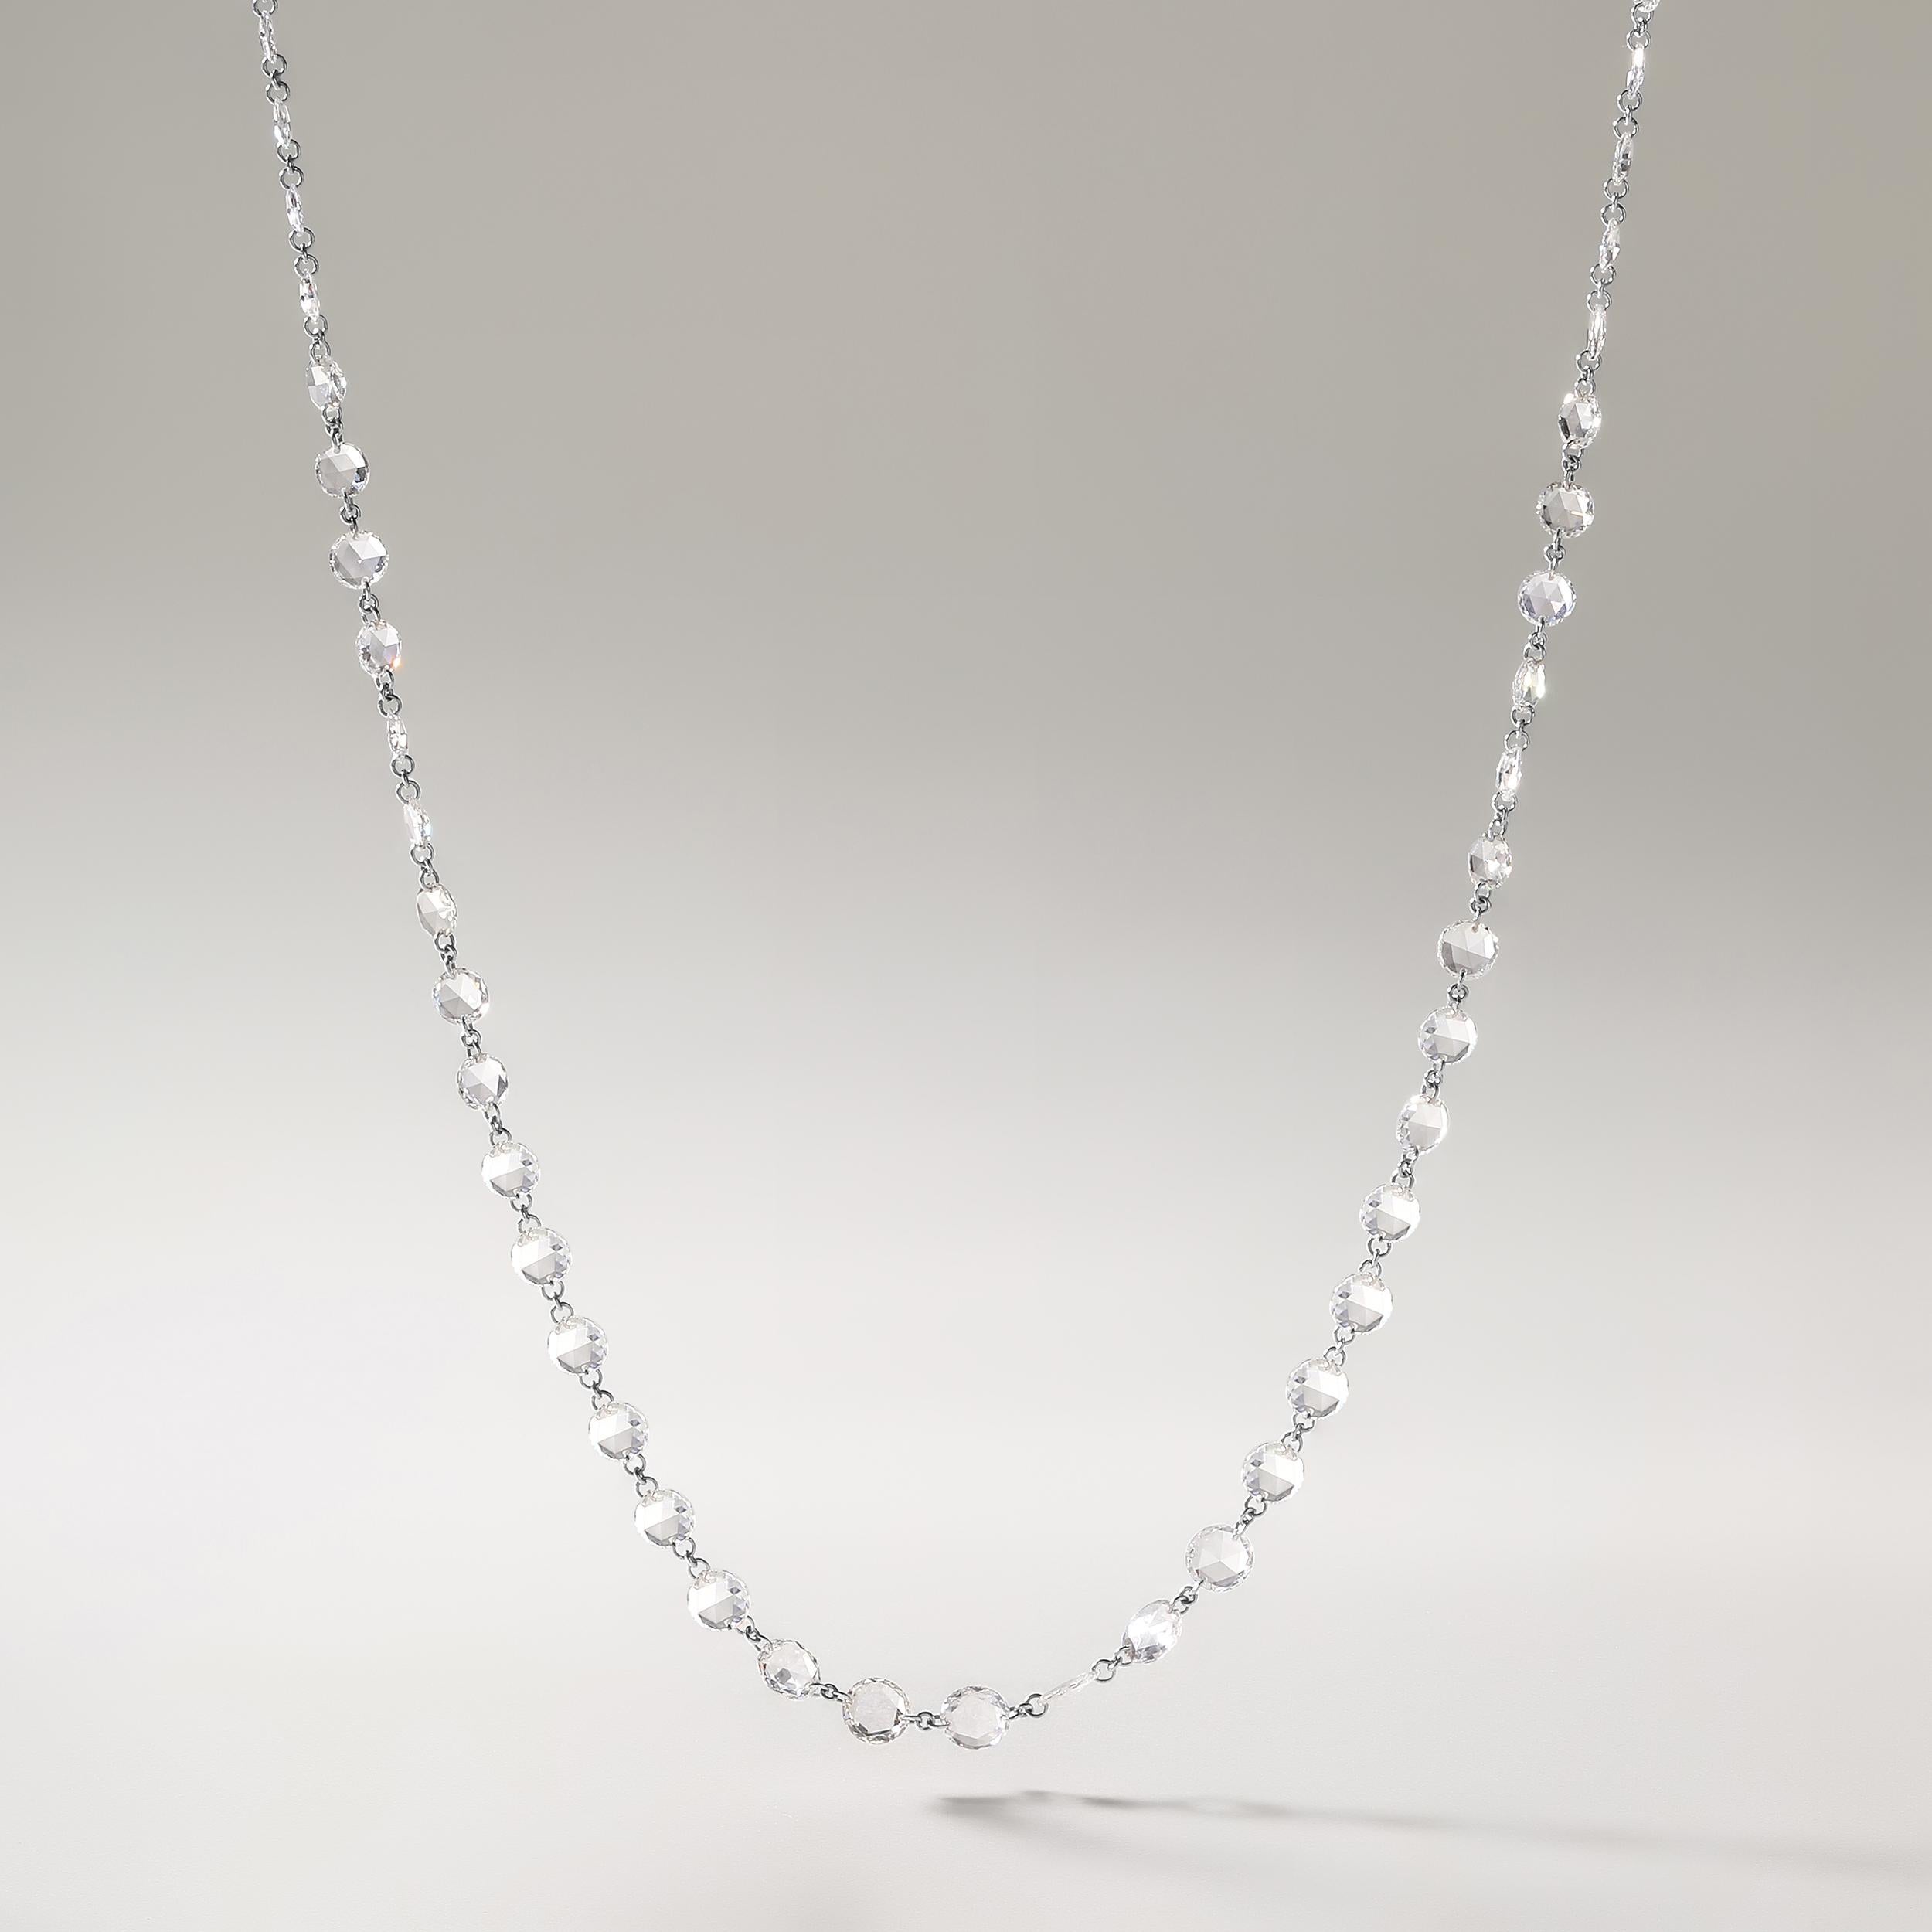 Crafted in 3.39 grams of 18K White Gold, the necklace contains 72 stones of Round Shaped Rose Cut Natural Natural Diamonds with a total of 9.58 carat in E-F color and VVS-VS clarity. The necklace length is 18 inches.

CONTEMPORARY AND TIMELESS